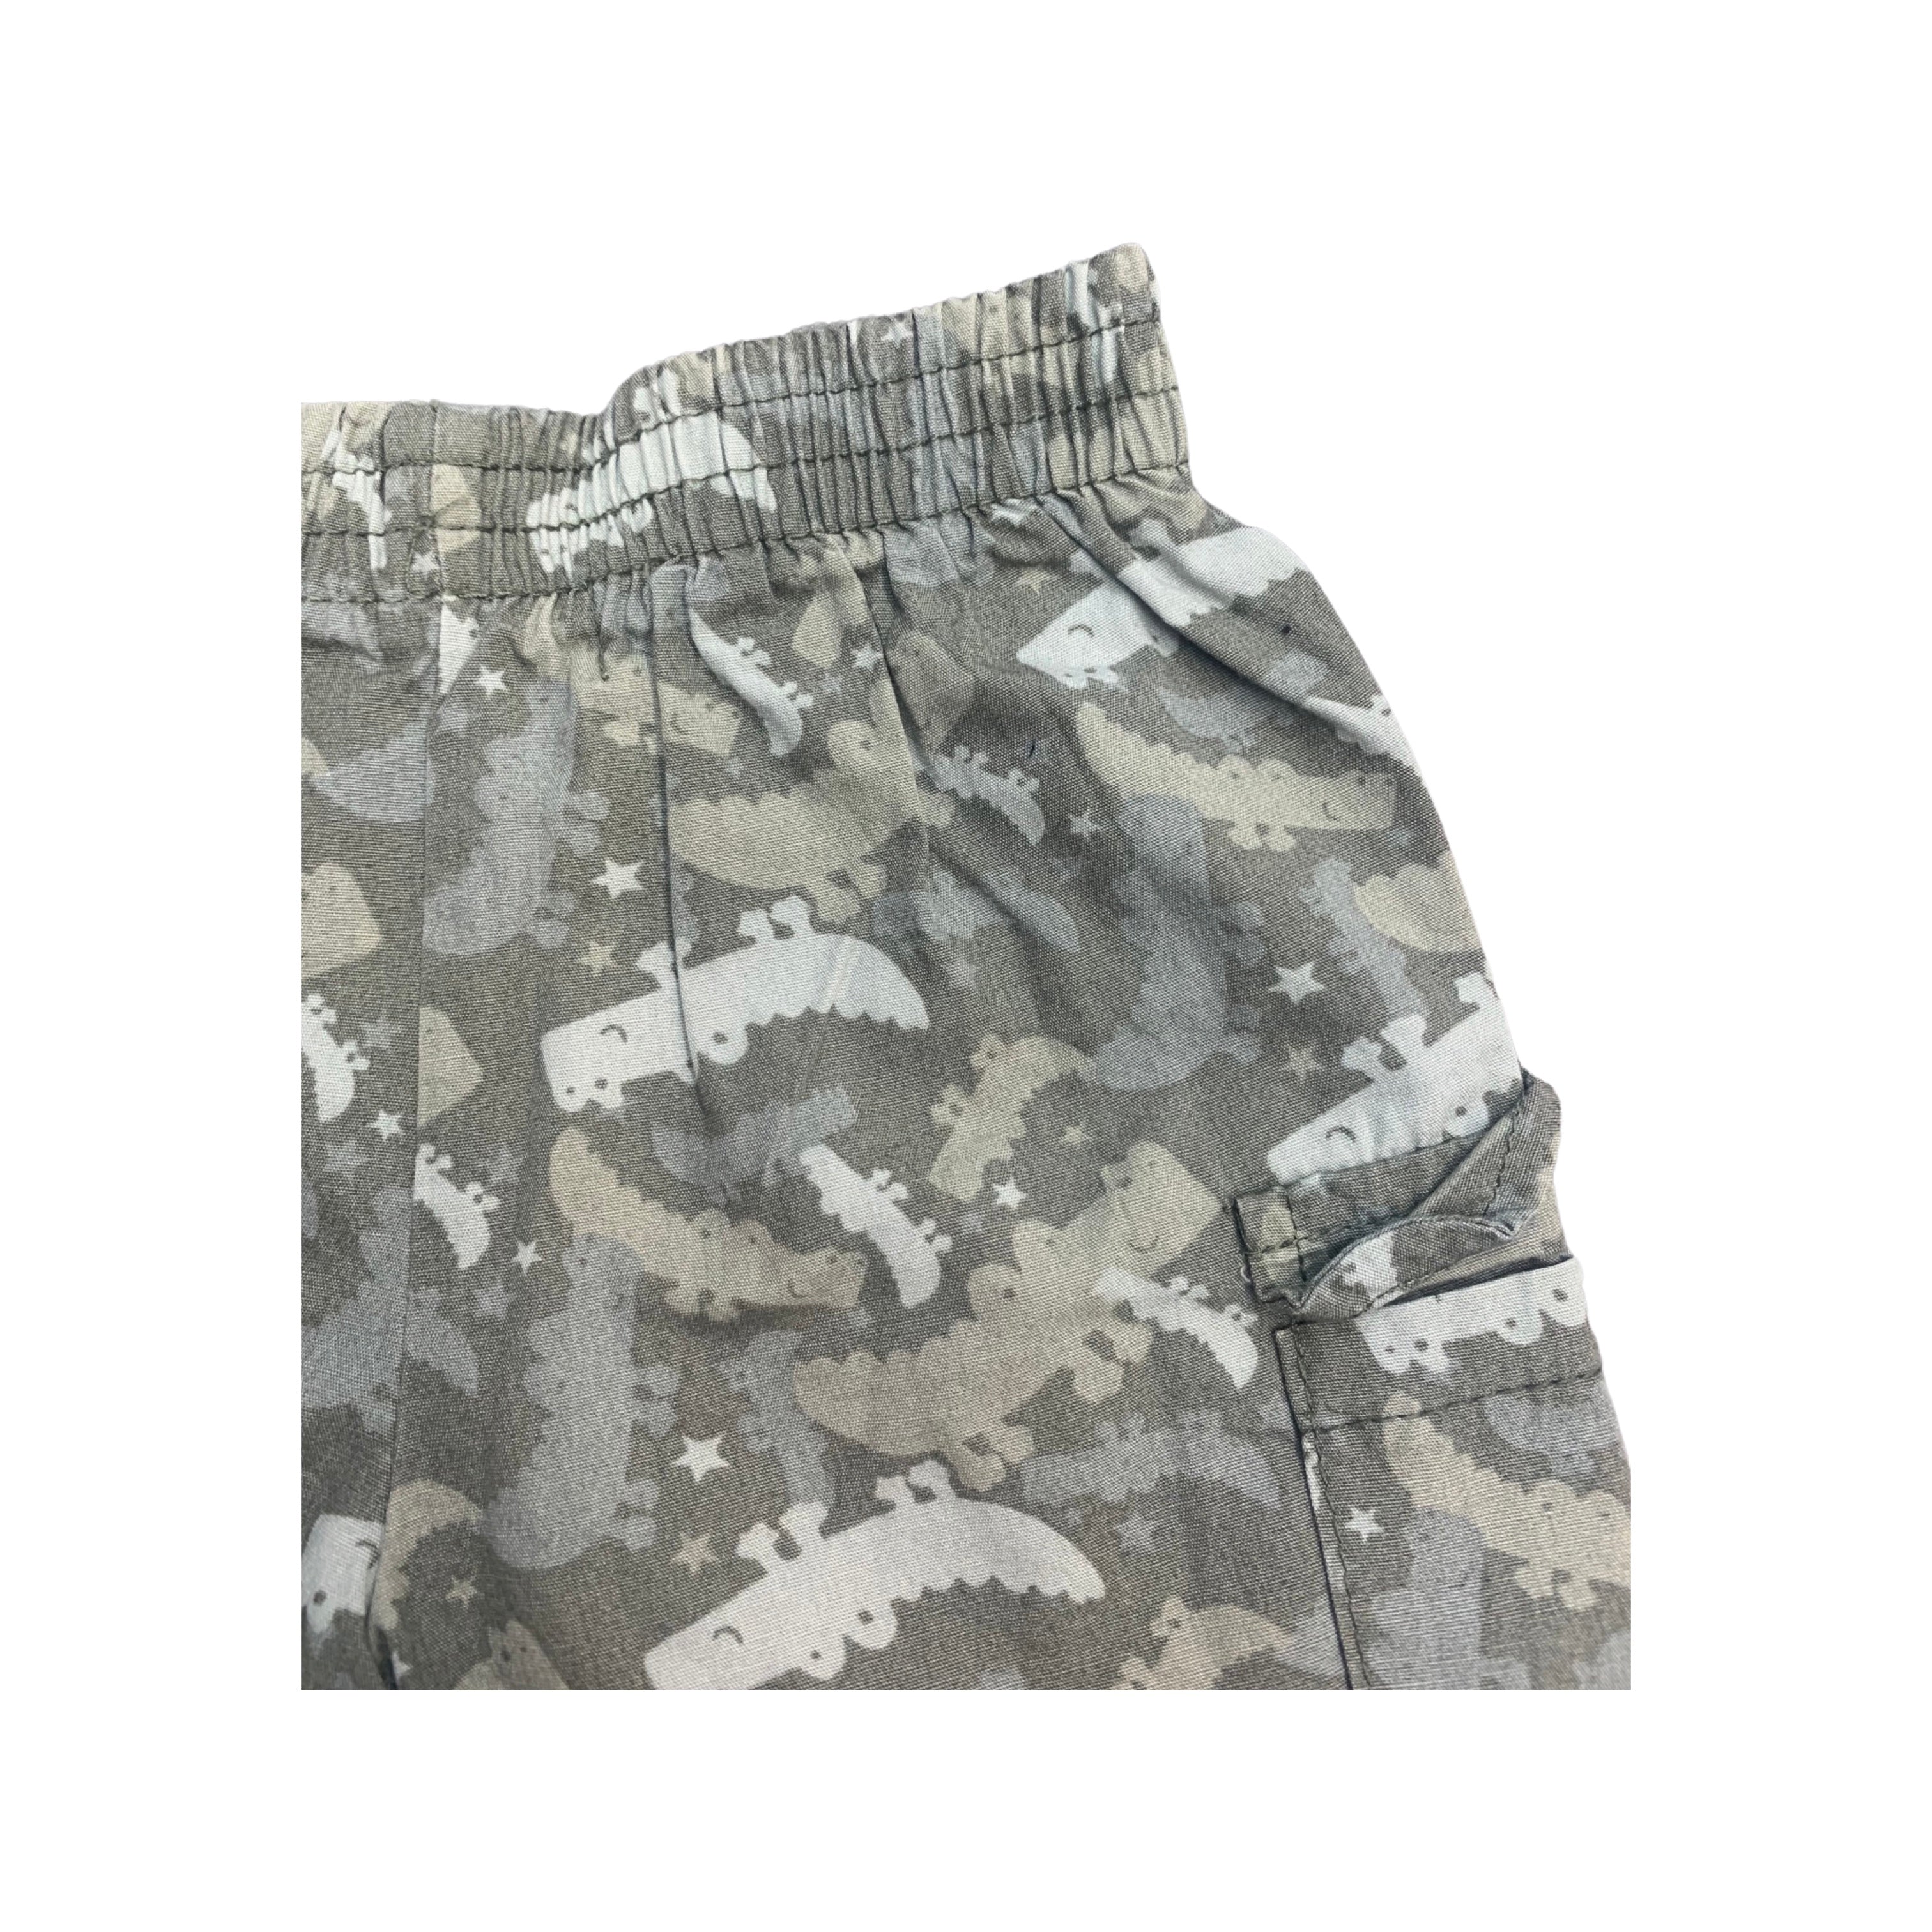 Early Days Crocodile Cargo Style Shorts 0-3 Months